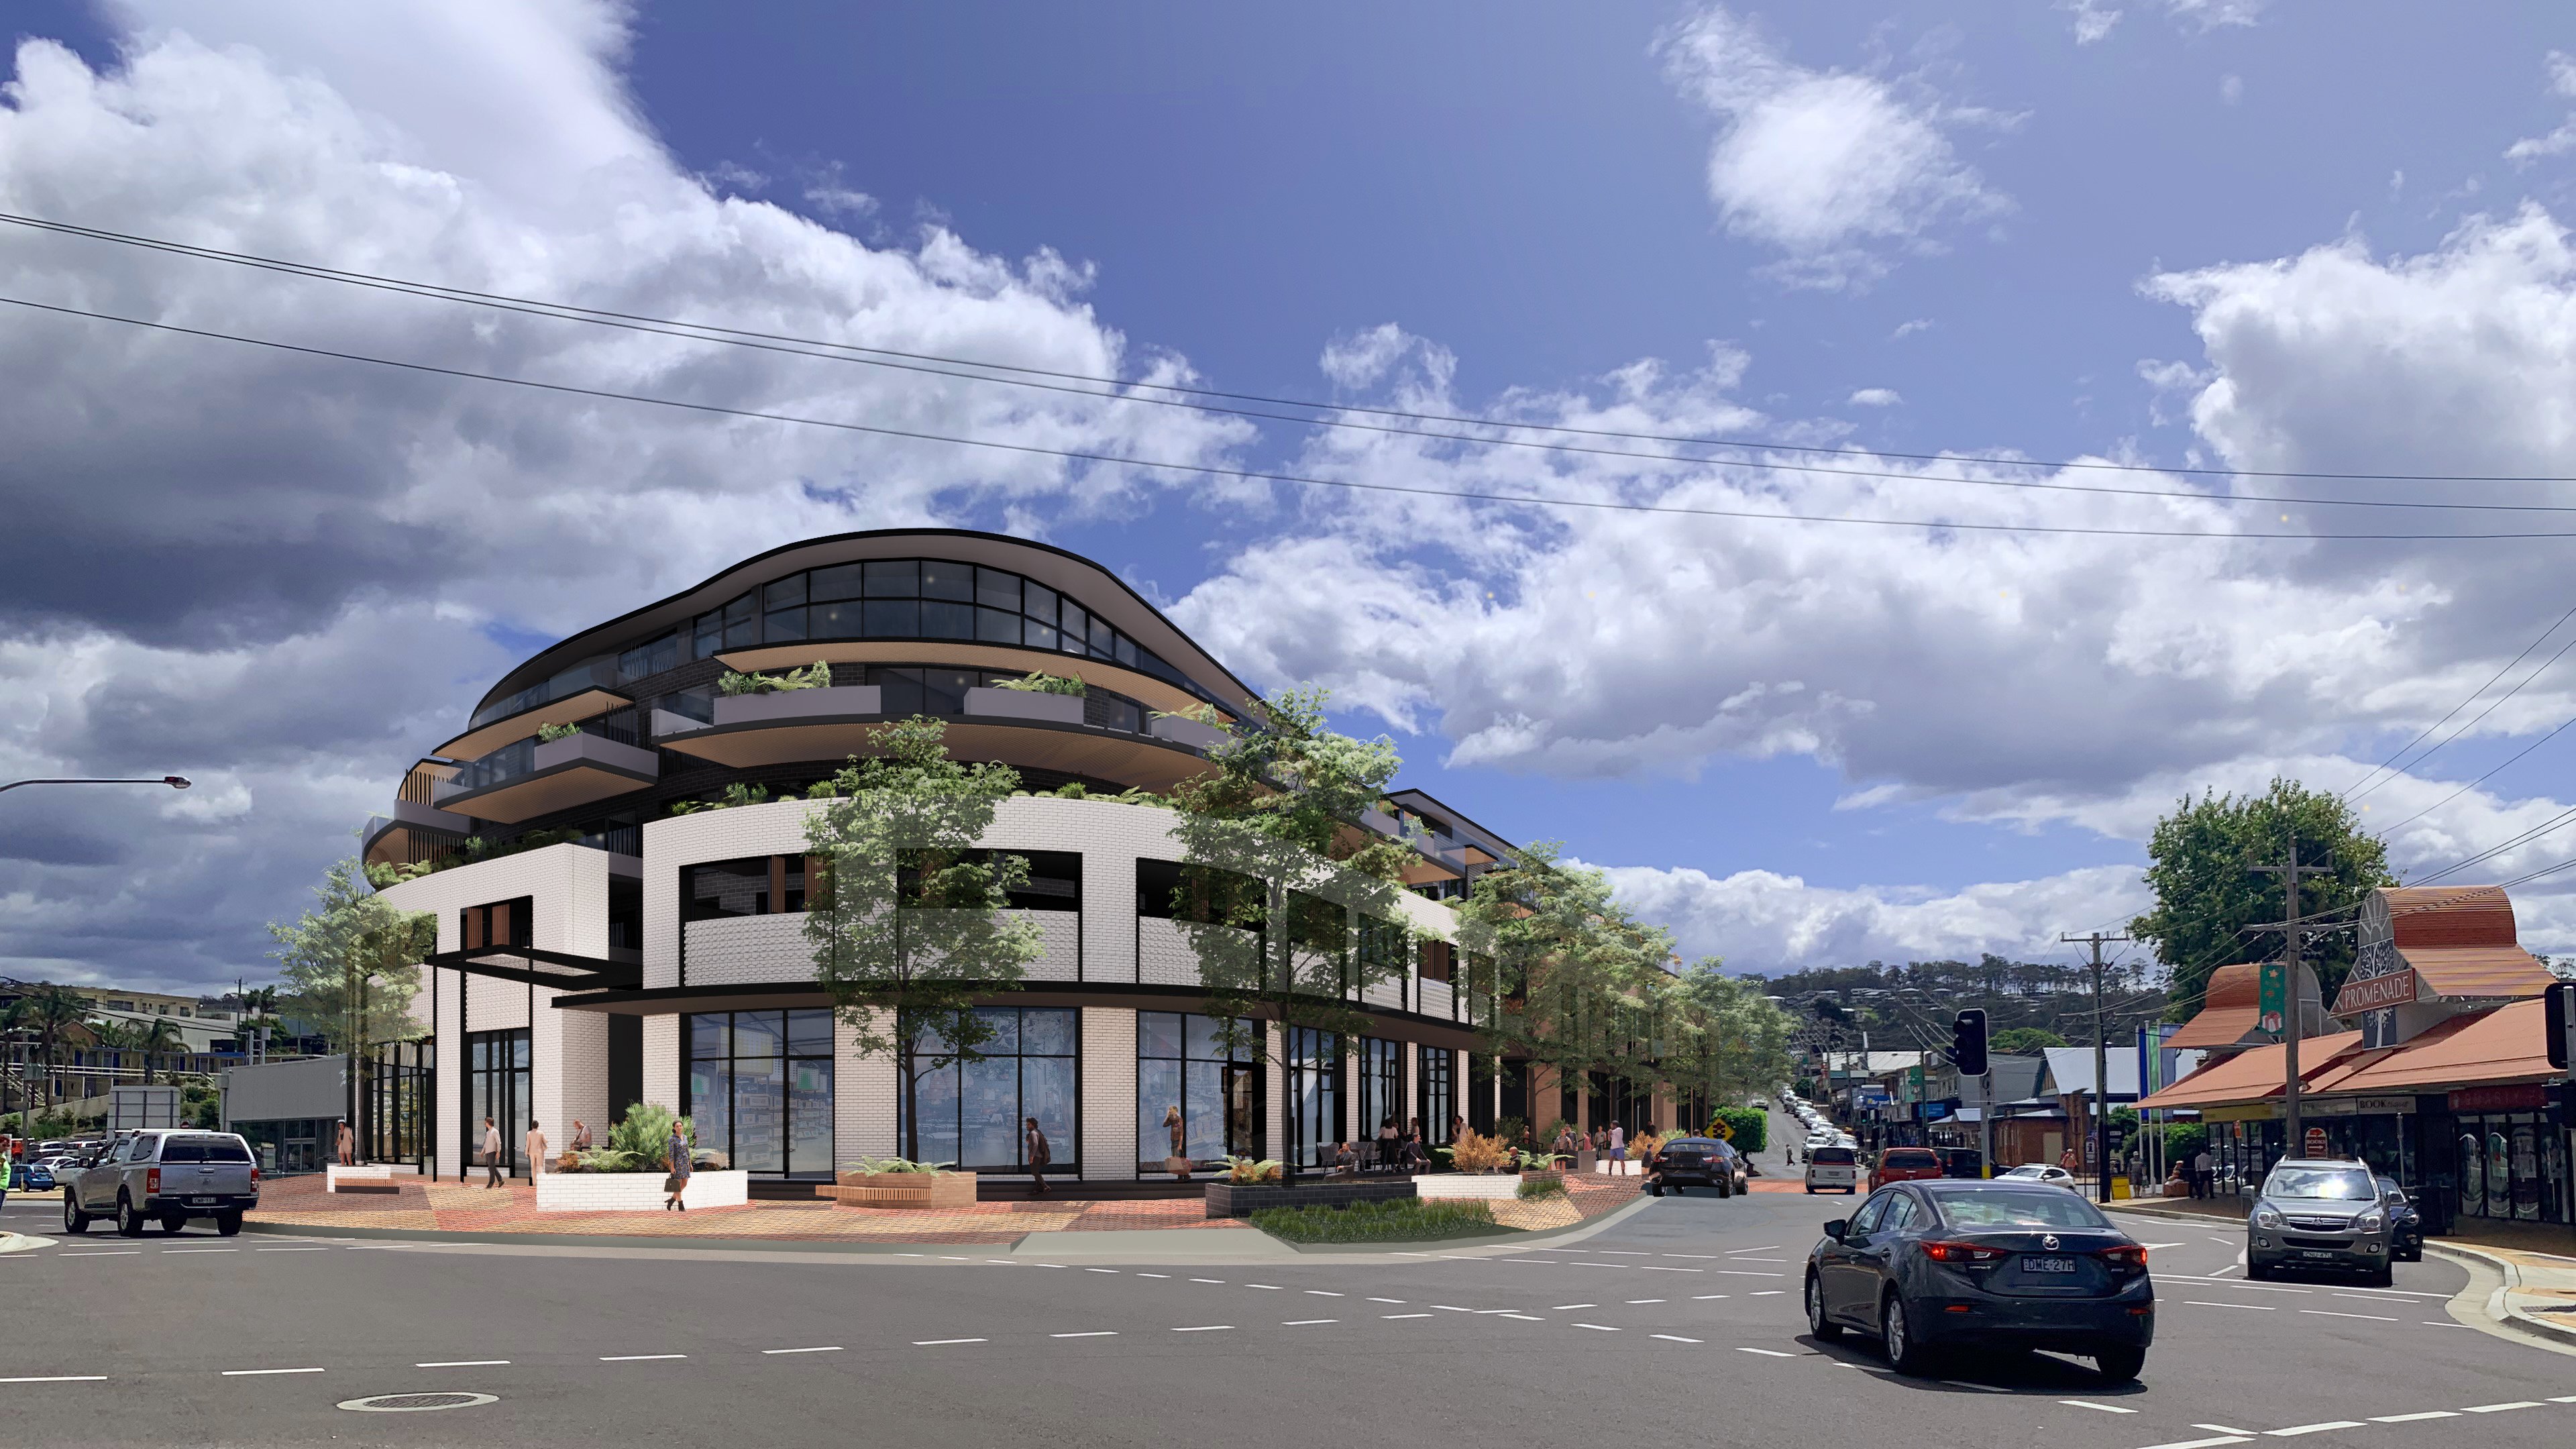 'Have Your Say' on plans for new Merimbula retail and residential complex